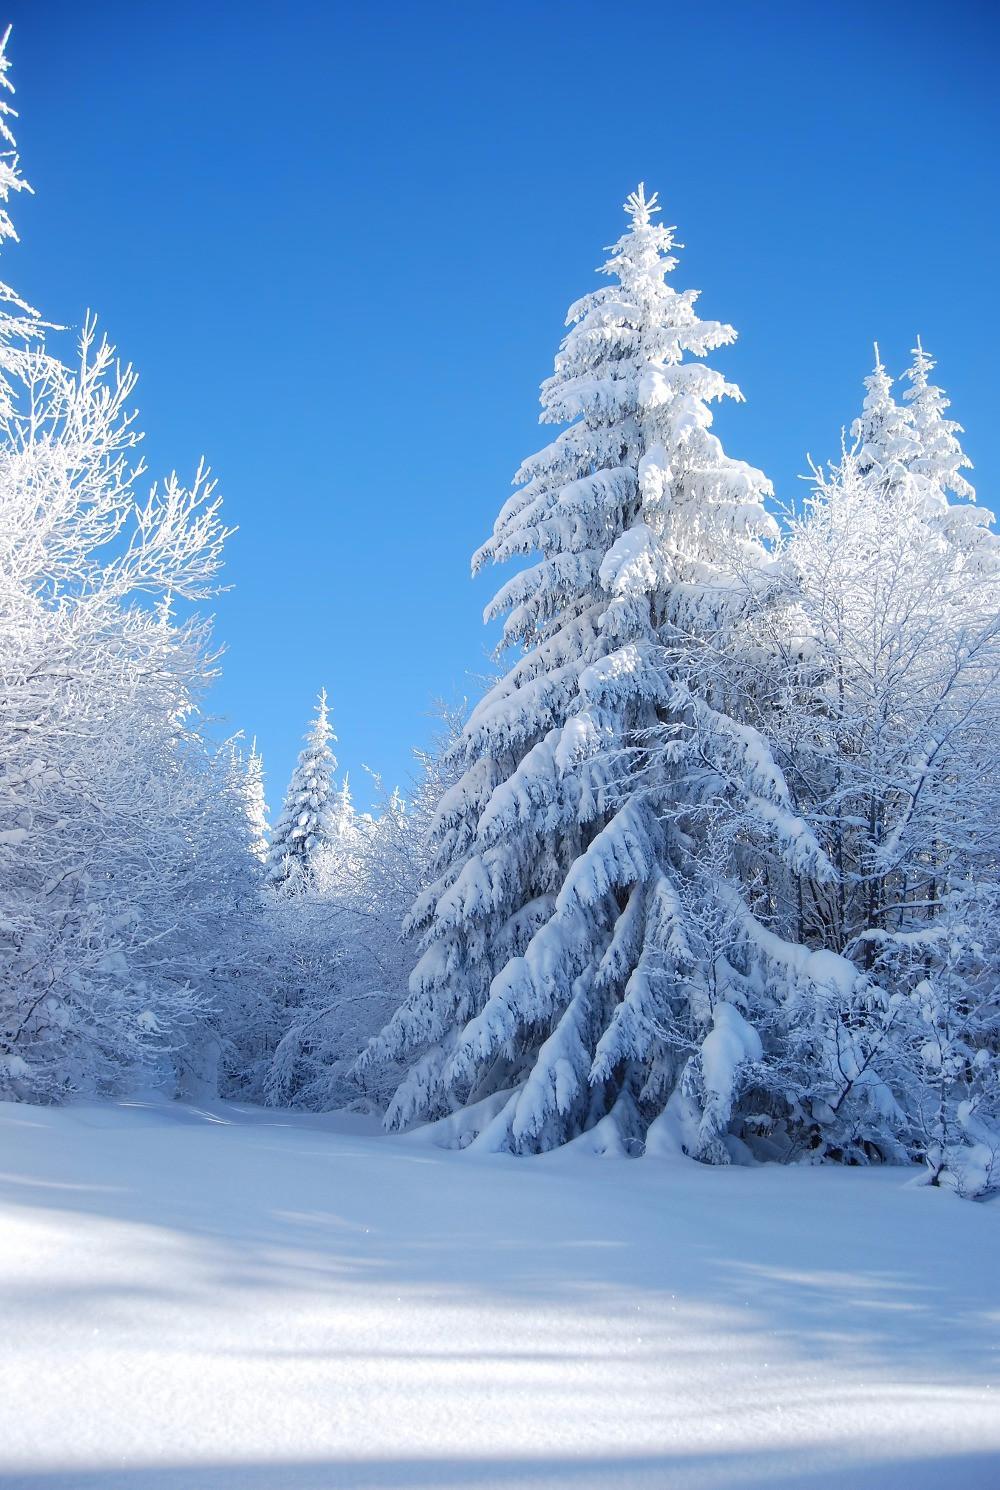 Blue Sky Thick Snow Covered Trees Forest Photo Background Outdoor Winter Scenic Wallpaper Holiday Photography Backdrop For Children From